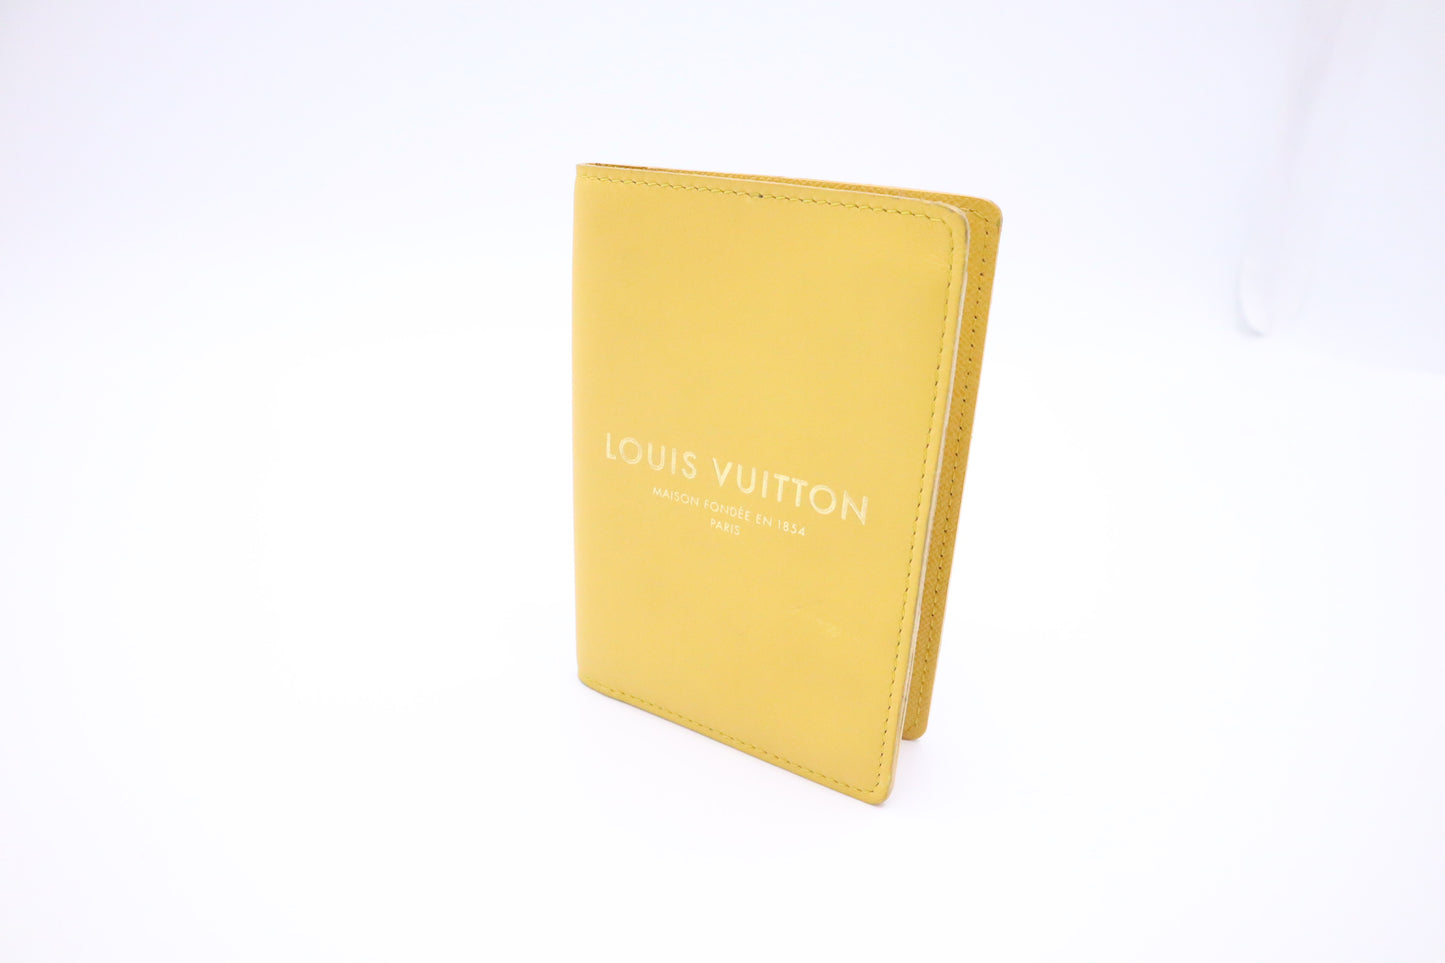 Louis Vuitton Passport Case in Yellow Leather